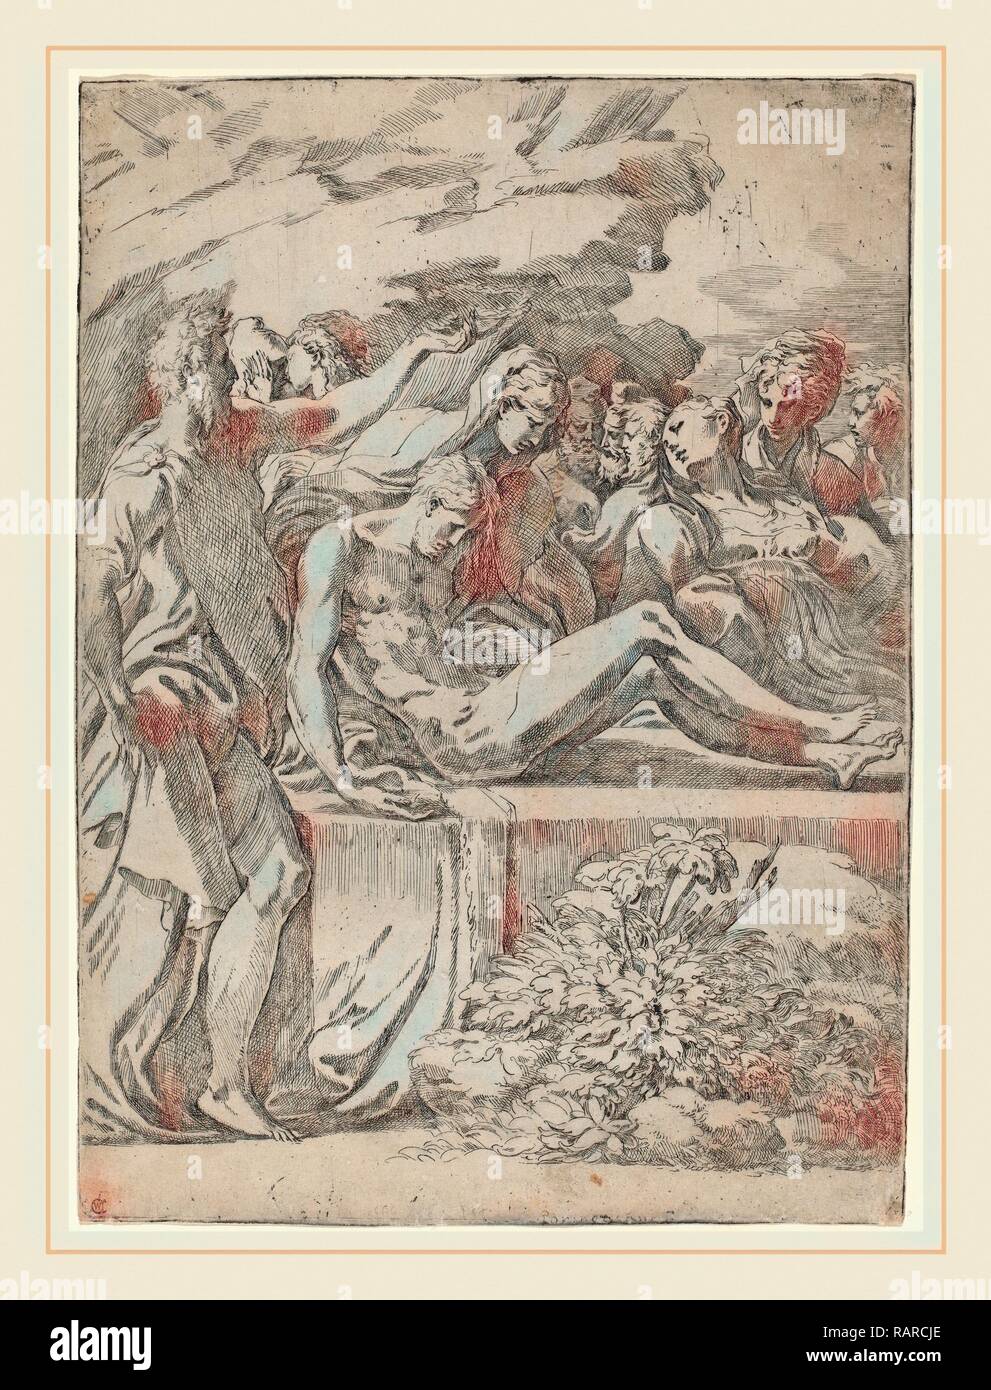 Parmigianino (Italian, 1503-1540), The Entombment, c. 1530, etching and drypoint [second version]. Reimagined Stock Photo